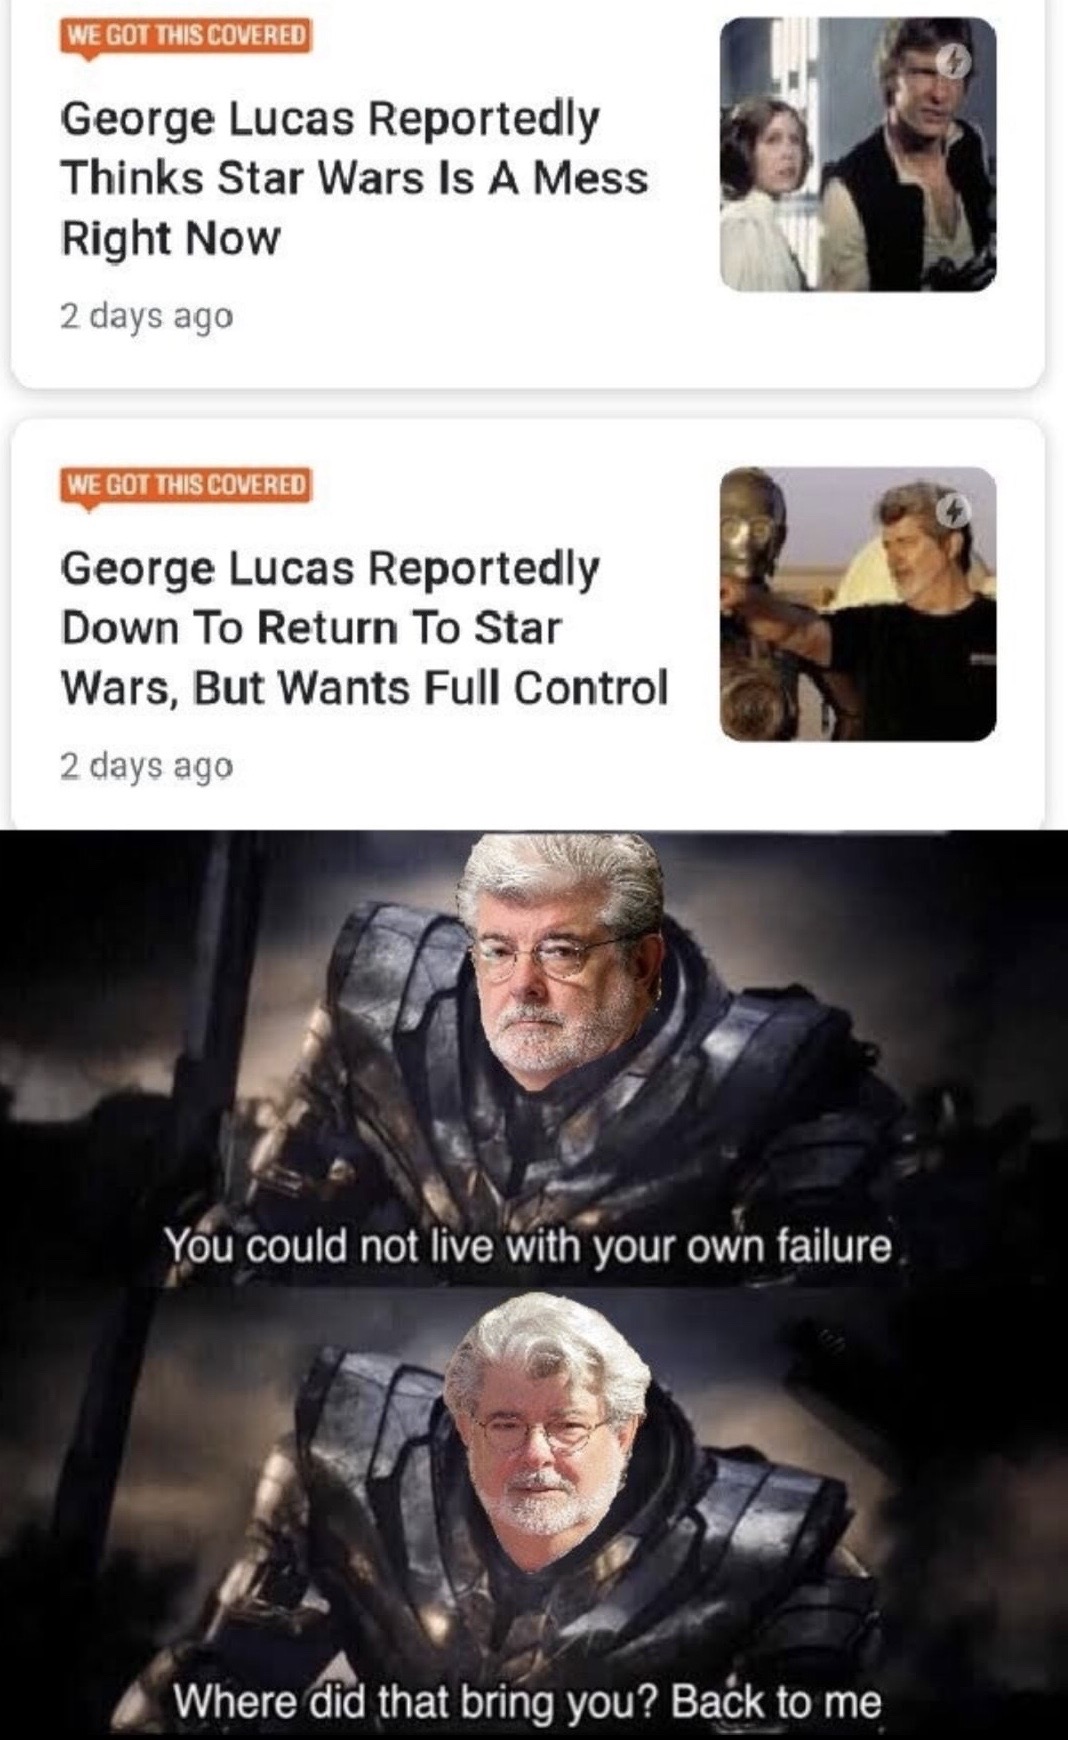 star wars - We Got This Covered George Lucas Reportedly Thinks Star Wars Is A Mess Right Now 2 days ago We Got This Covered George Lucas Reportedly Down To Return To Star Wars, But Wants Full Control 2 days ago You could not live with your own failure 'Wh